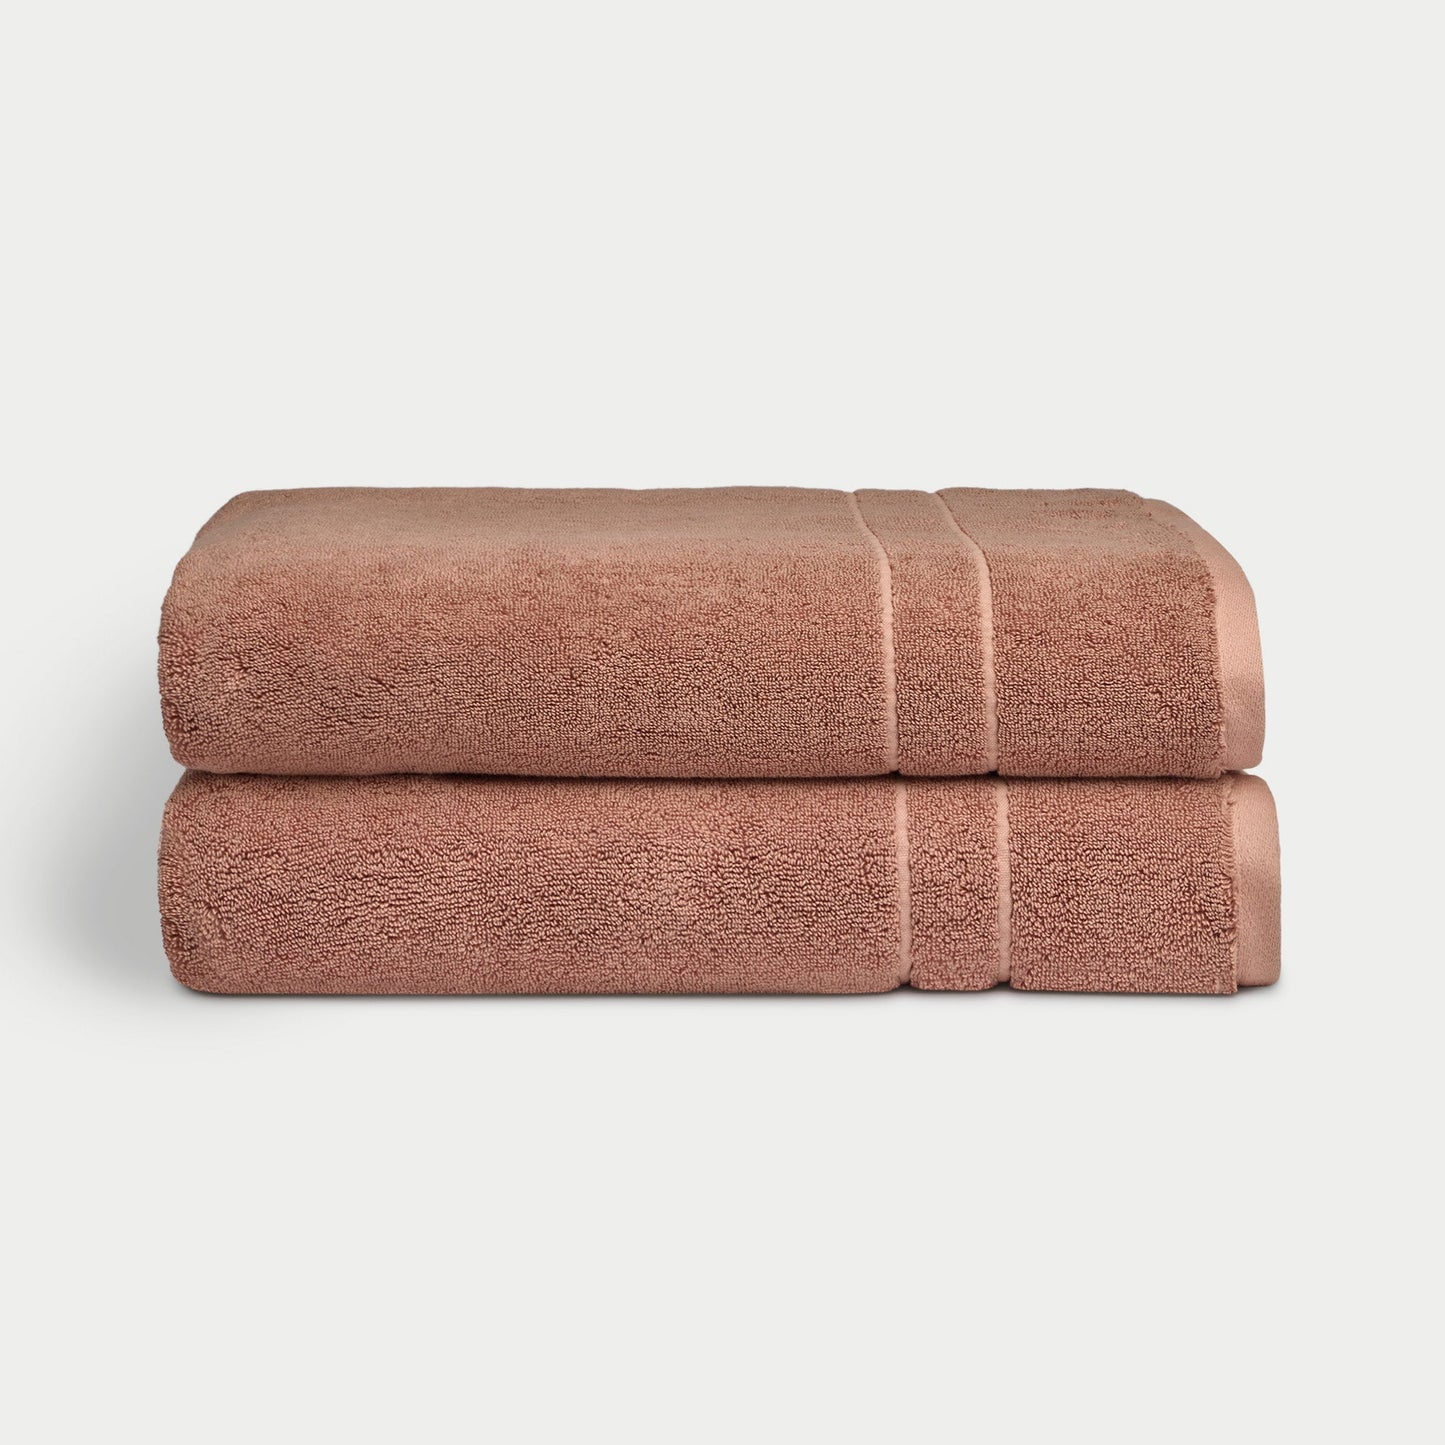 Premium Plush Bath Sheets in the color clay. Photo of bath sheets taken with white background |Color:Clay